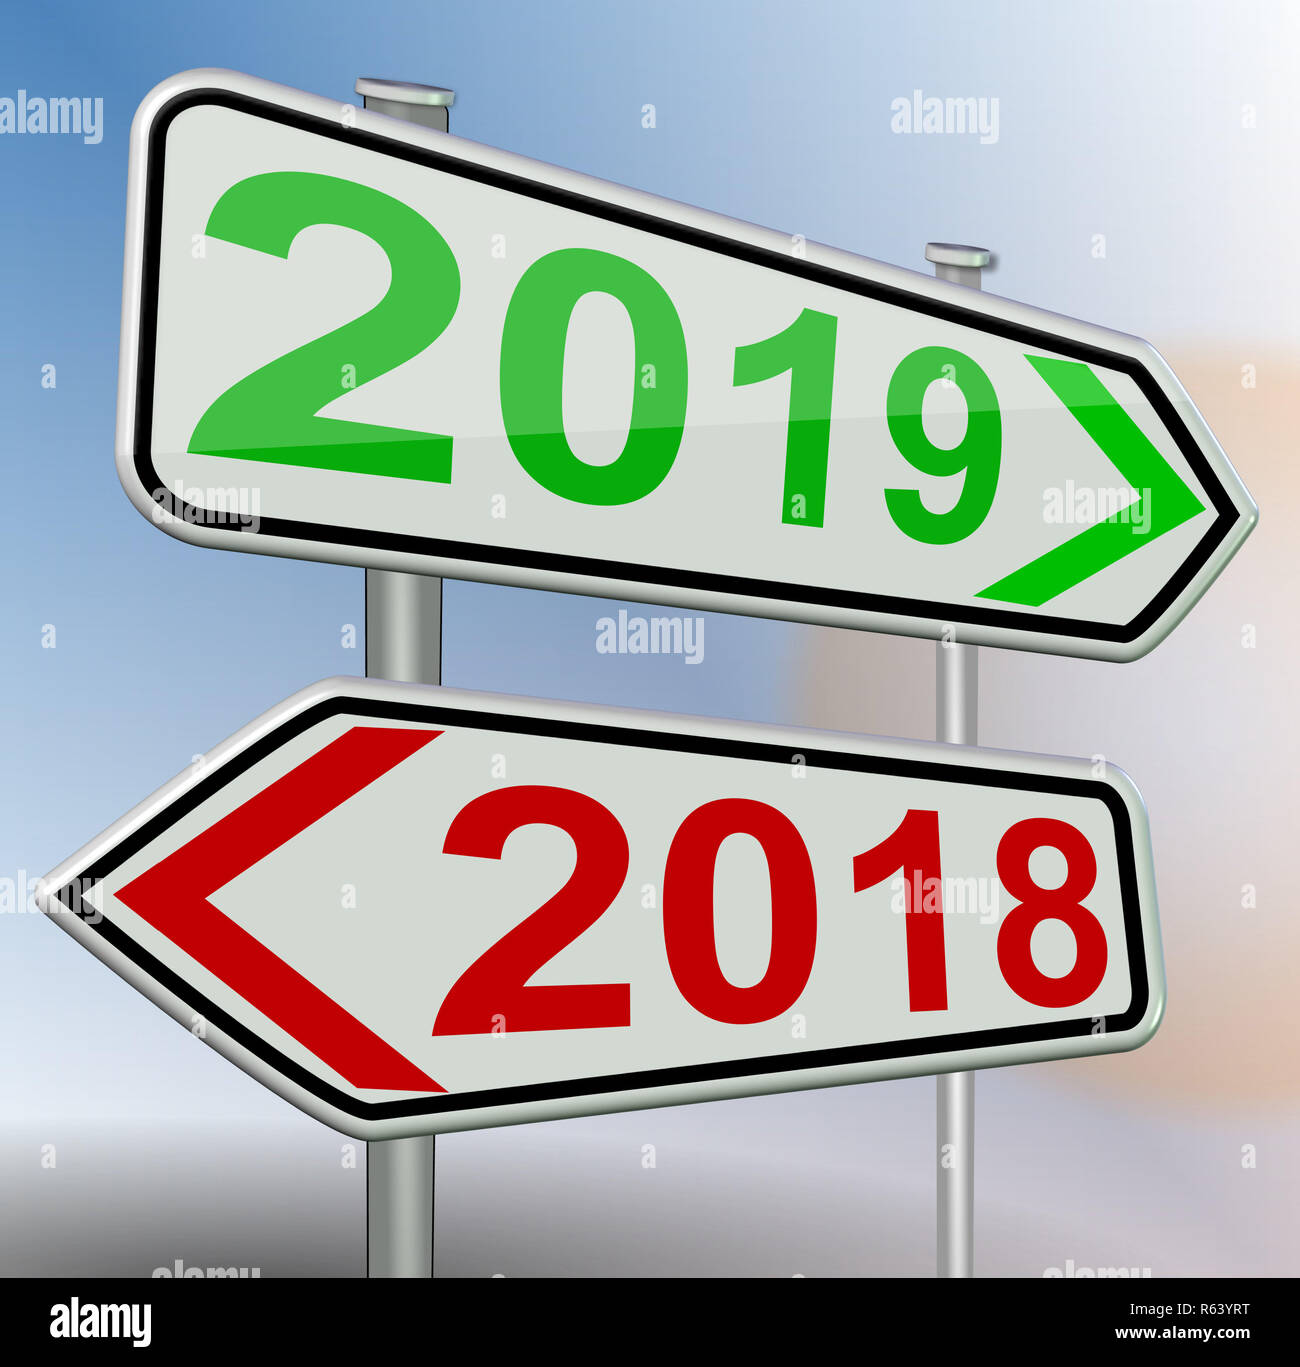 2019 2018 new  year change road sign red green 3d rendering Stock Photo